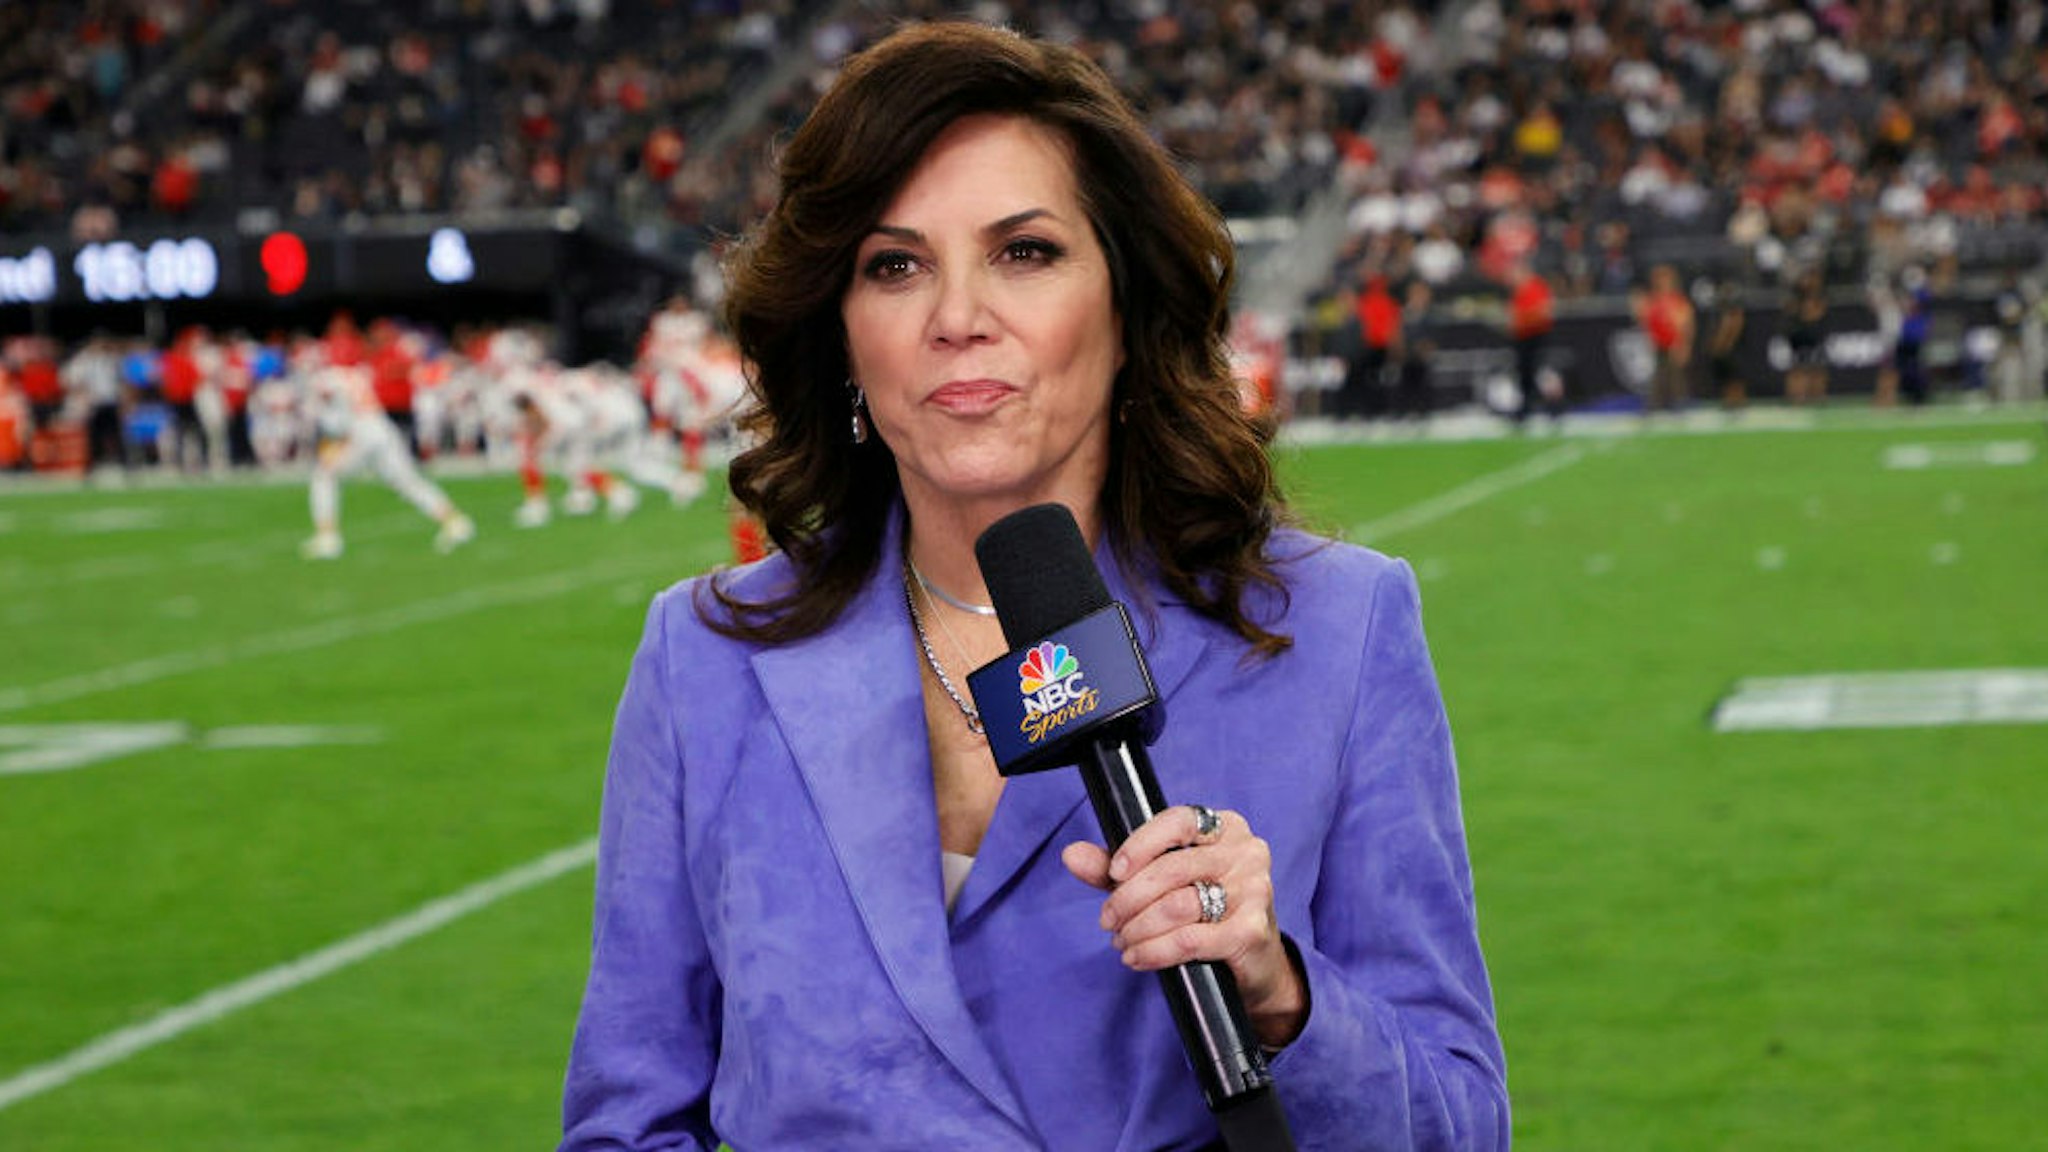 LAS VEGAS, NEVADA - NOVEMBER 14: NBC "Sunday Night Football" sideline reporter Michele Tafoya speaks during a game between the Kansas City Chiefs and the Las Vegas Raiders at Allegiant Stadium on November 14, 2021 in Las Vegas, Nevada. The Chiefs defeated the Raiders 41-14. (Photo by Ethan Miller/Getty Images)